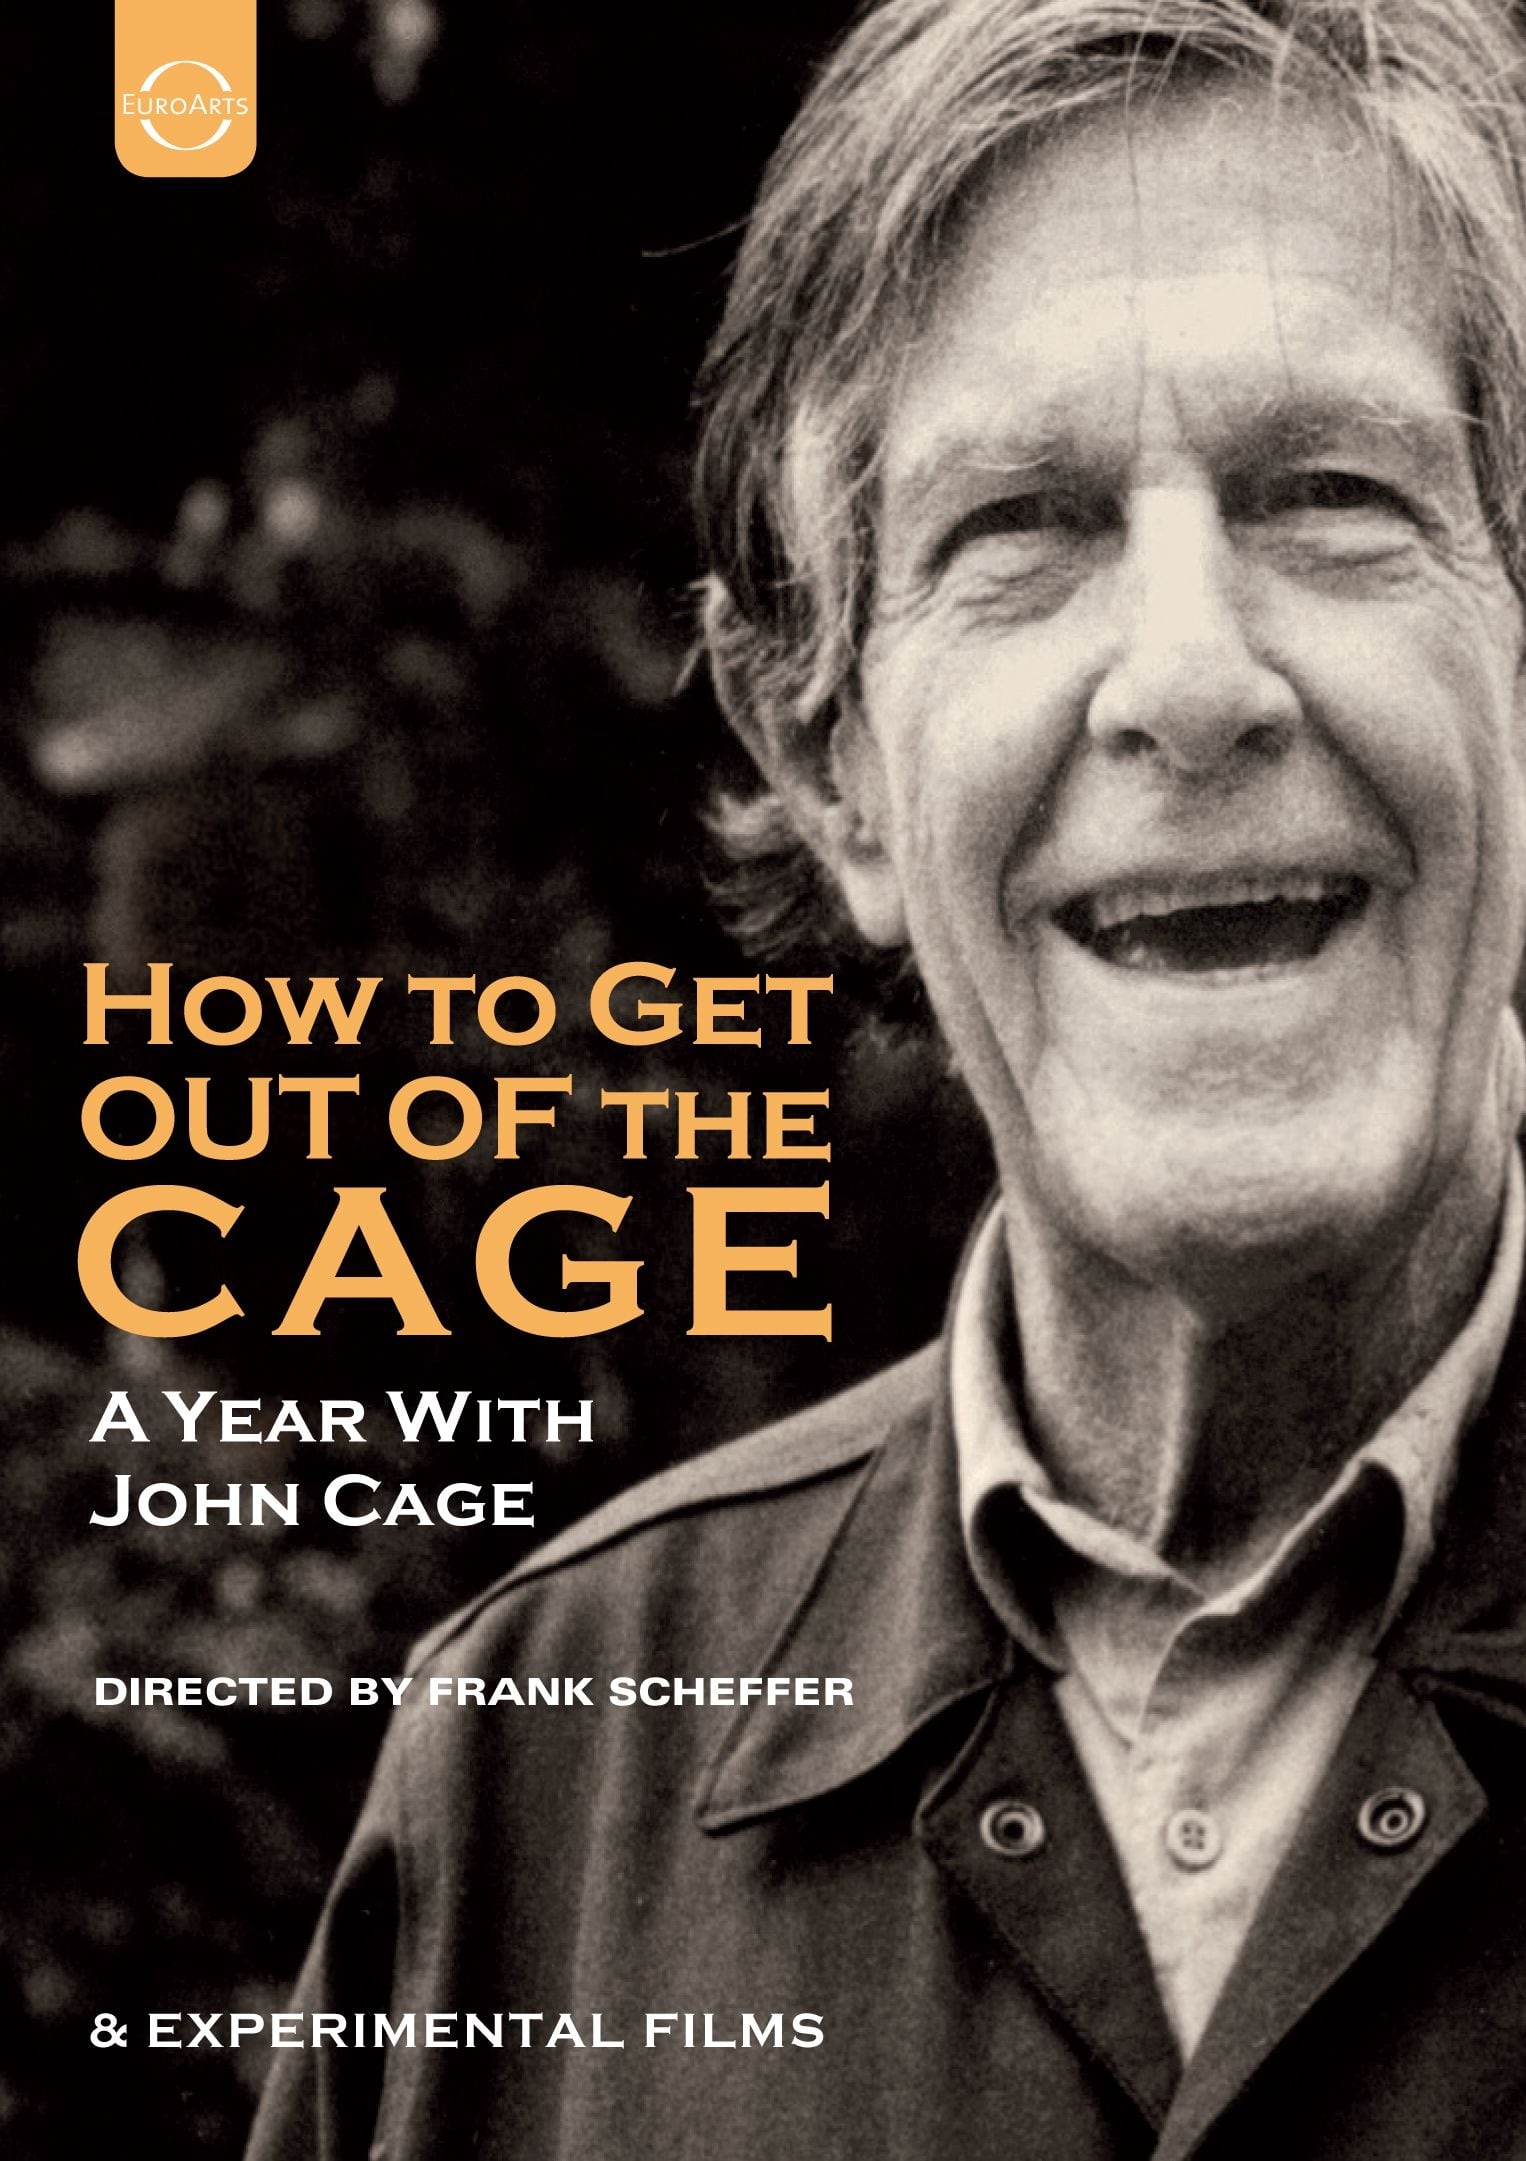 How to Get out of the Cage